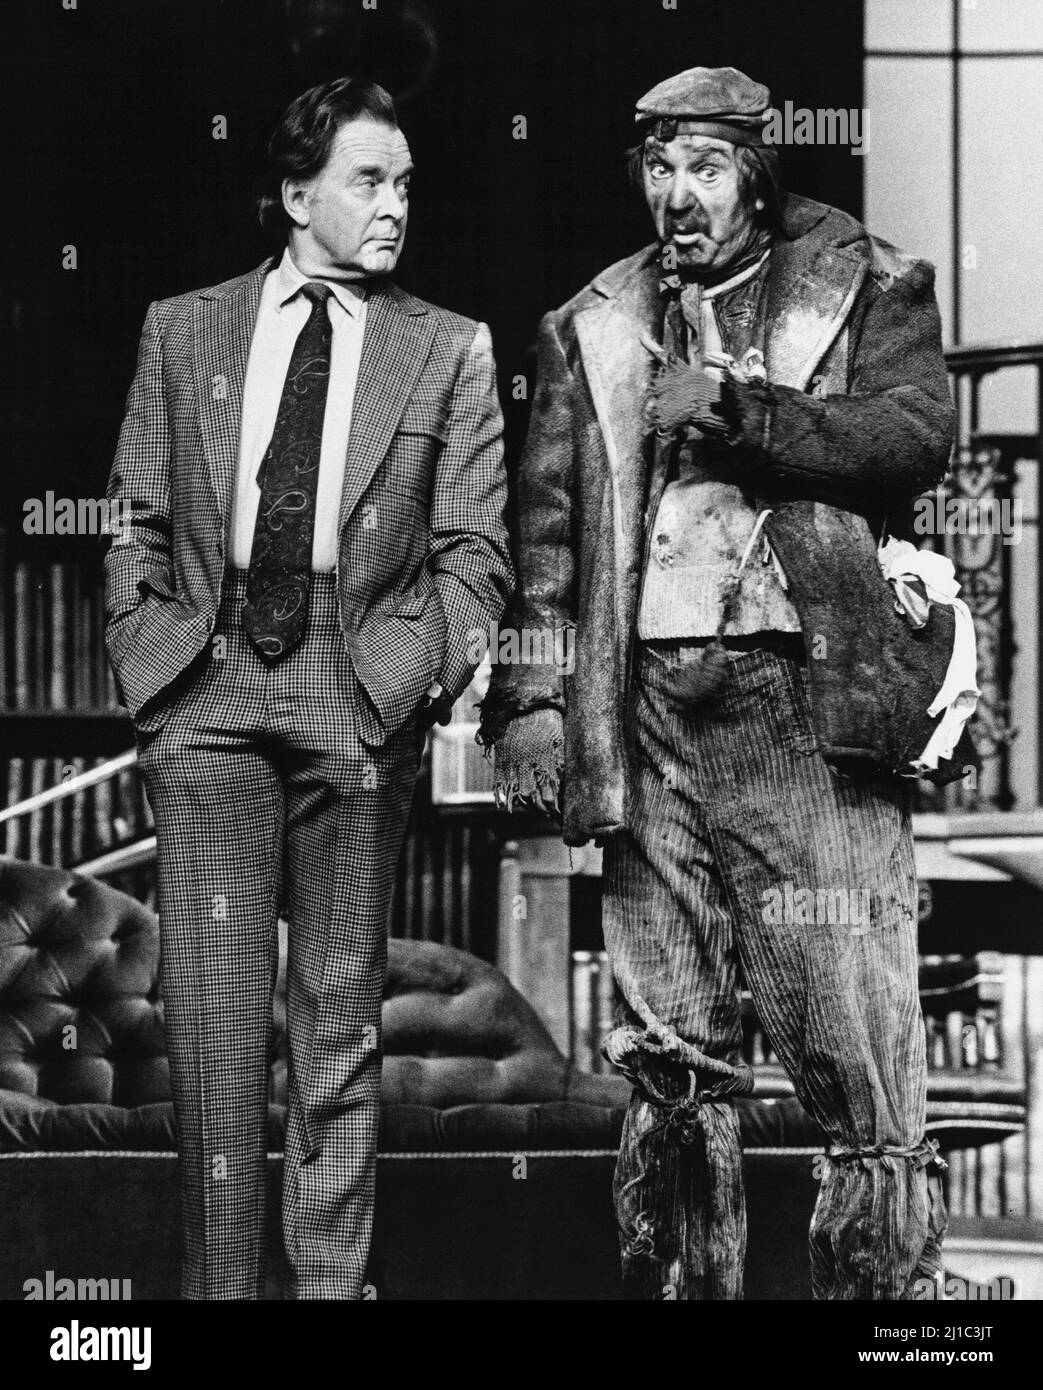 27a Wimpole Street - l-r: Tony Britton (Henry Higgins), Peter Bayliss (Alfred Doolittle) in MY FAIR LADY at the Adelphi Theatre, London WC2  25/10/1979  a Haymarket Theatre Leicester / Cameron Mackintosh co-production  book & lyrics: Alan Jay Lerner  music: Frederick Loewe  after 'Pygmalion' by George Bernard Shaw  set design: Adrian Vaux  costumes: Tim Goodchild  lighting: Chris Ellis  musical staging & choreography: Gillian Lynne  director: Robin Midgley Stock Photo